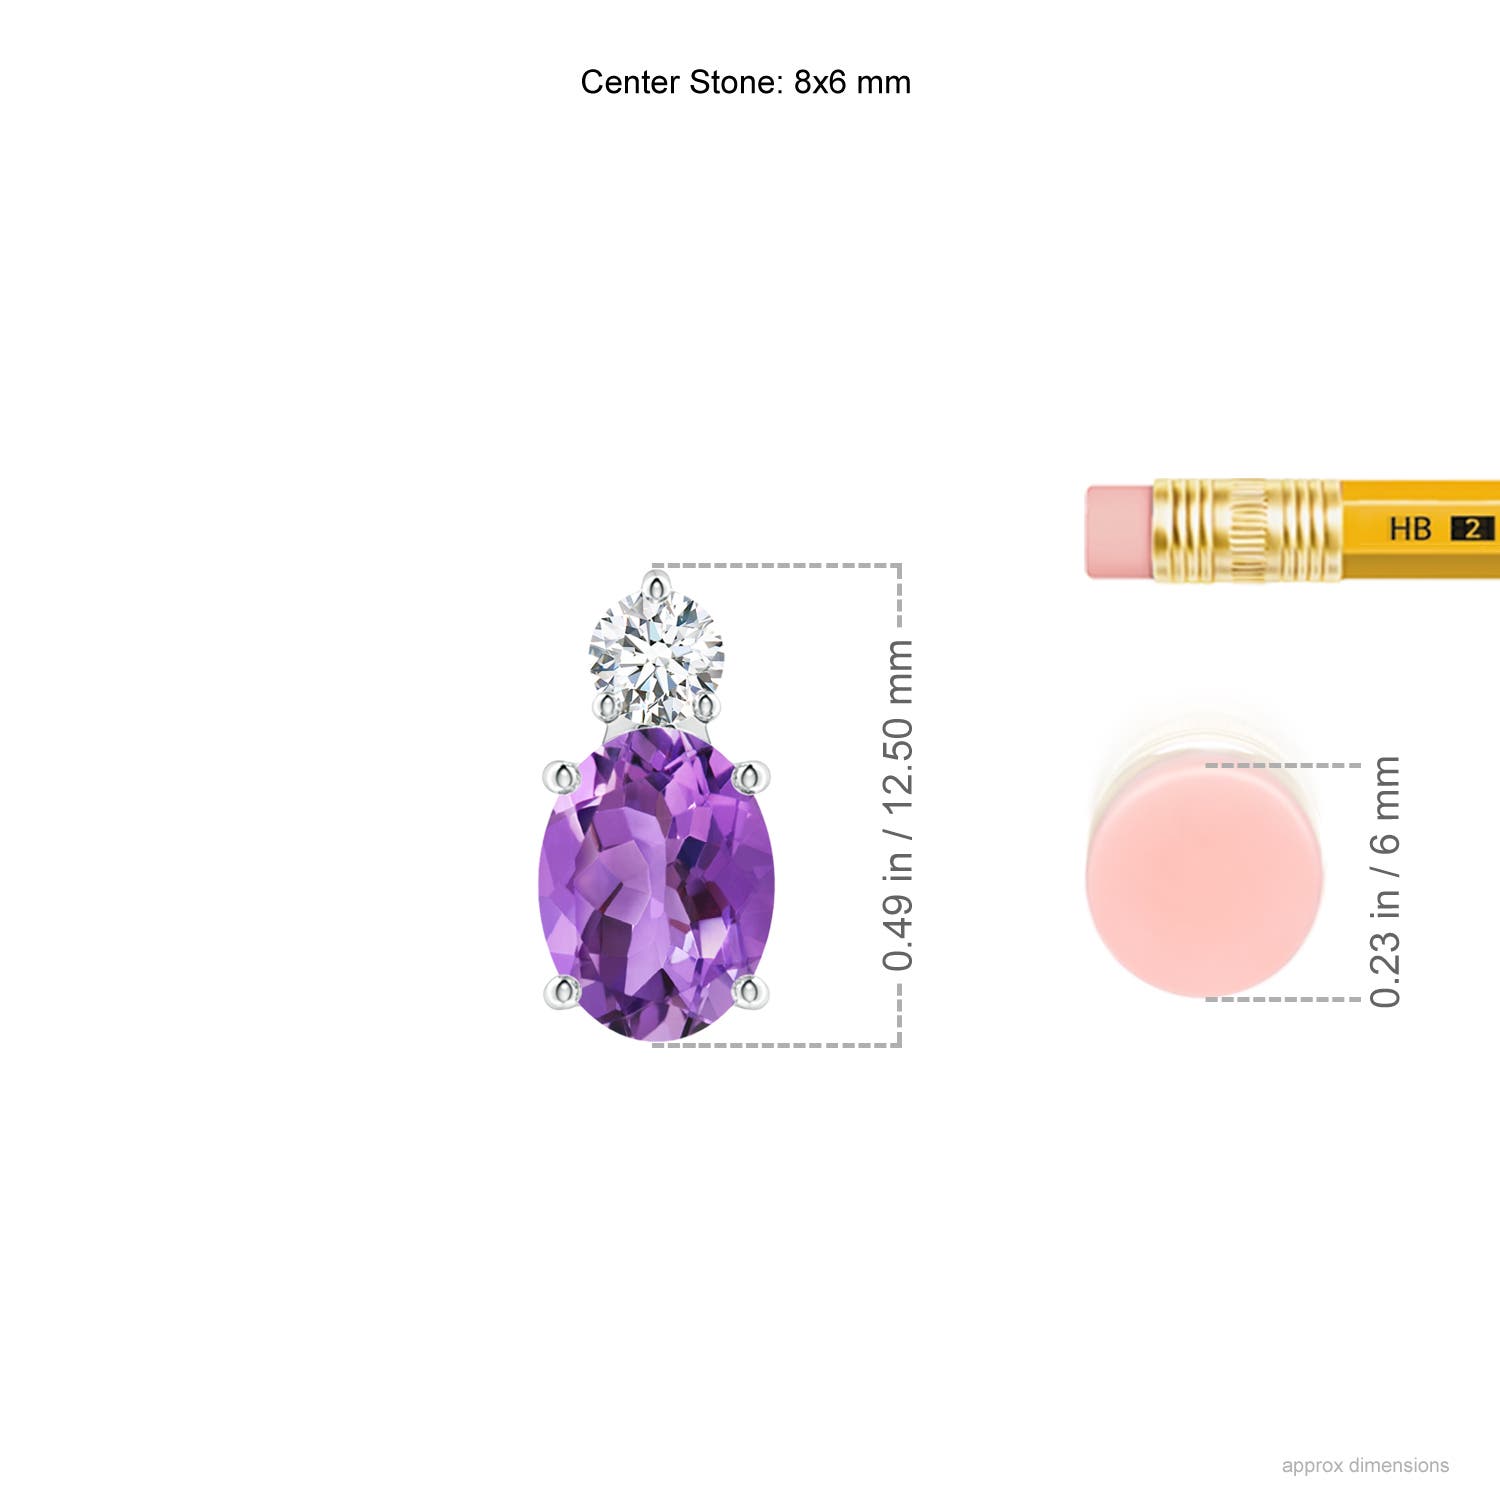 AA - Amethyst / 1.31 CT / 14 KT White Gold